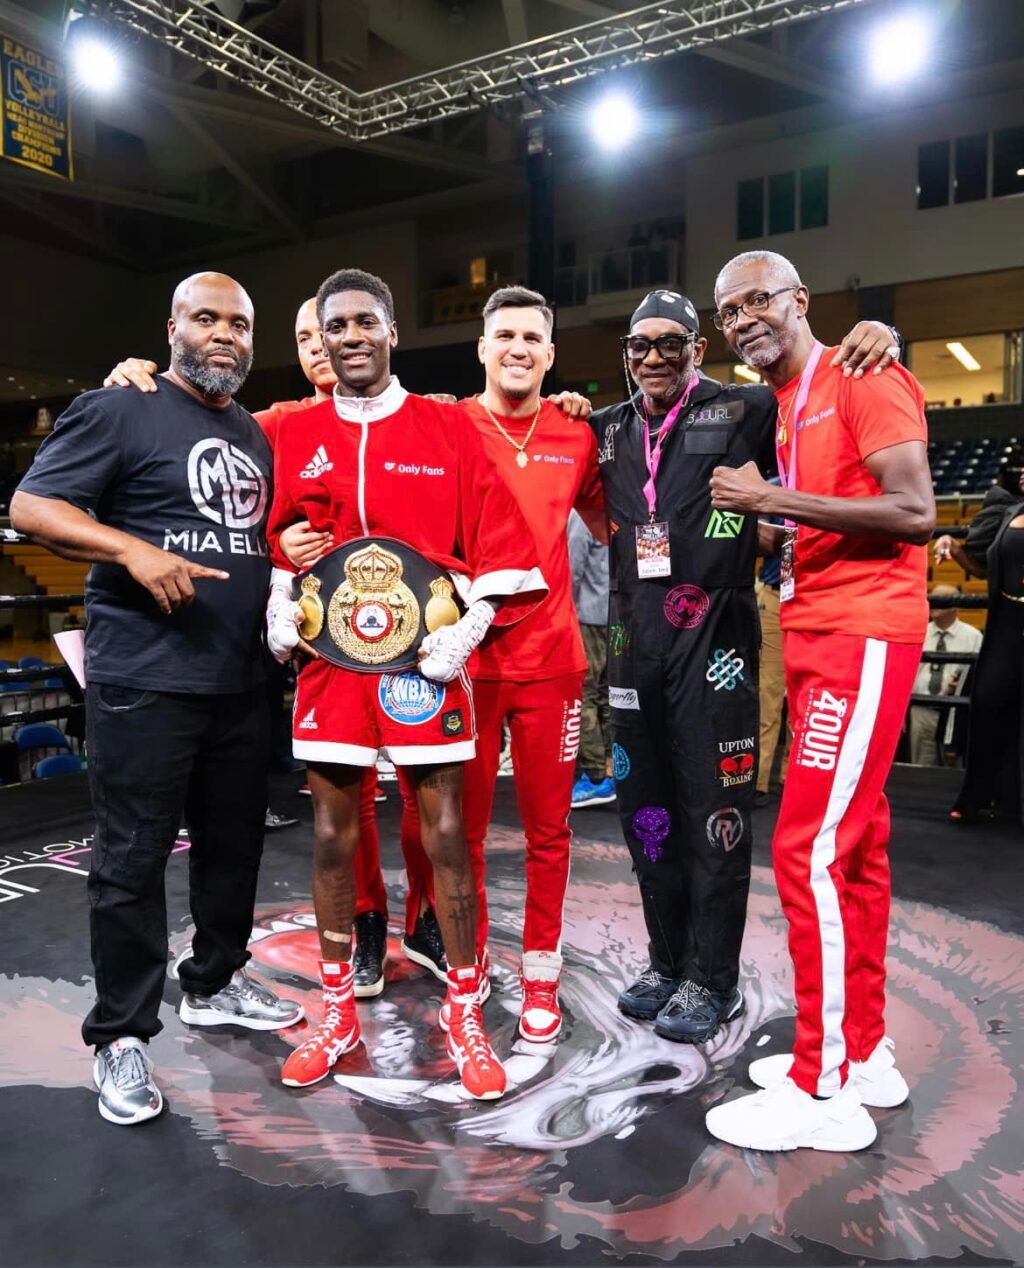 Domnique Crowder (wearing the WBA belt) poses with his team after beating Kenny Demecillo. | Photo from Crowder's Facebook page